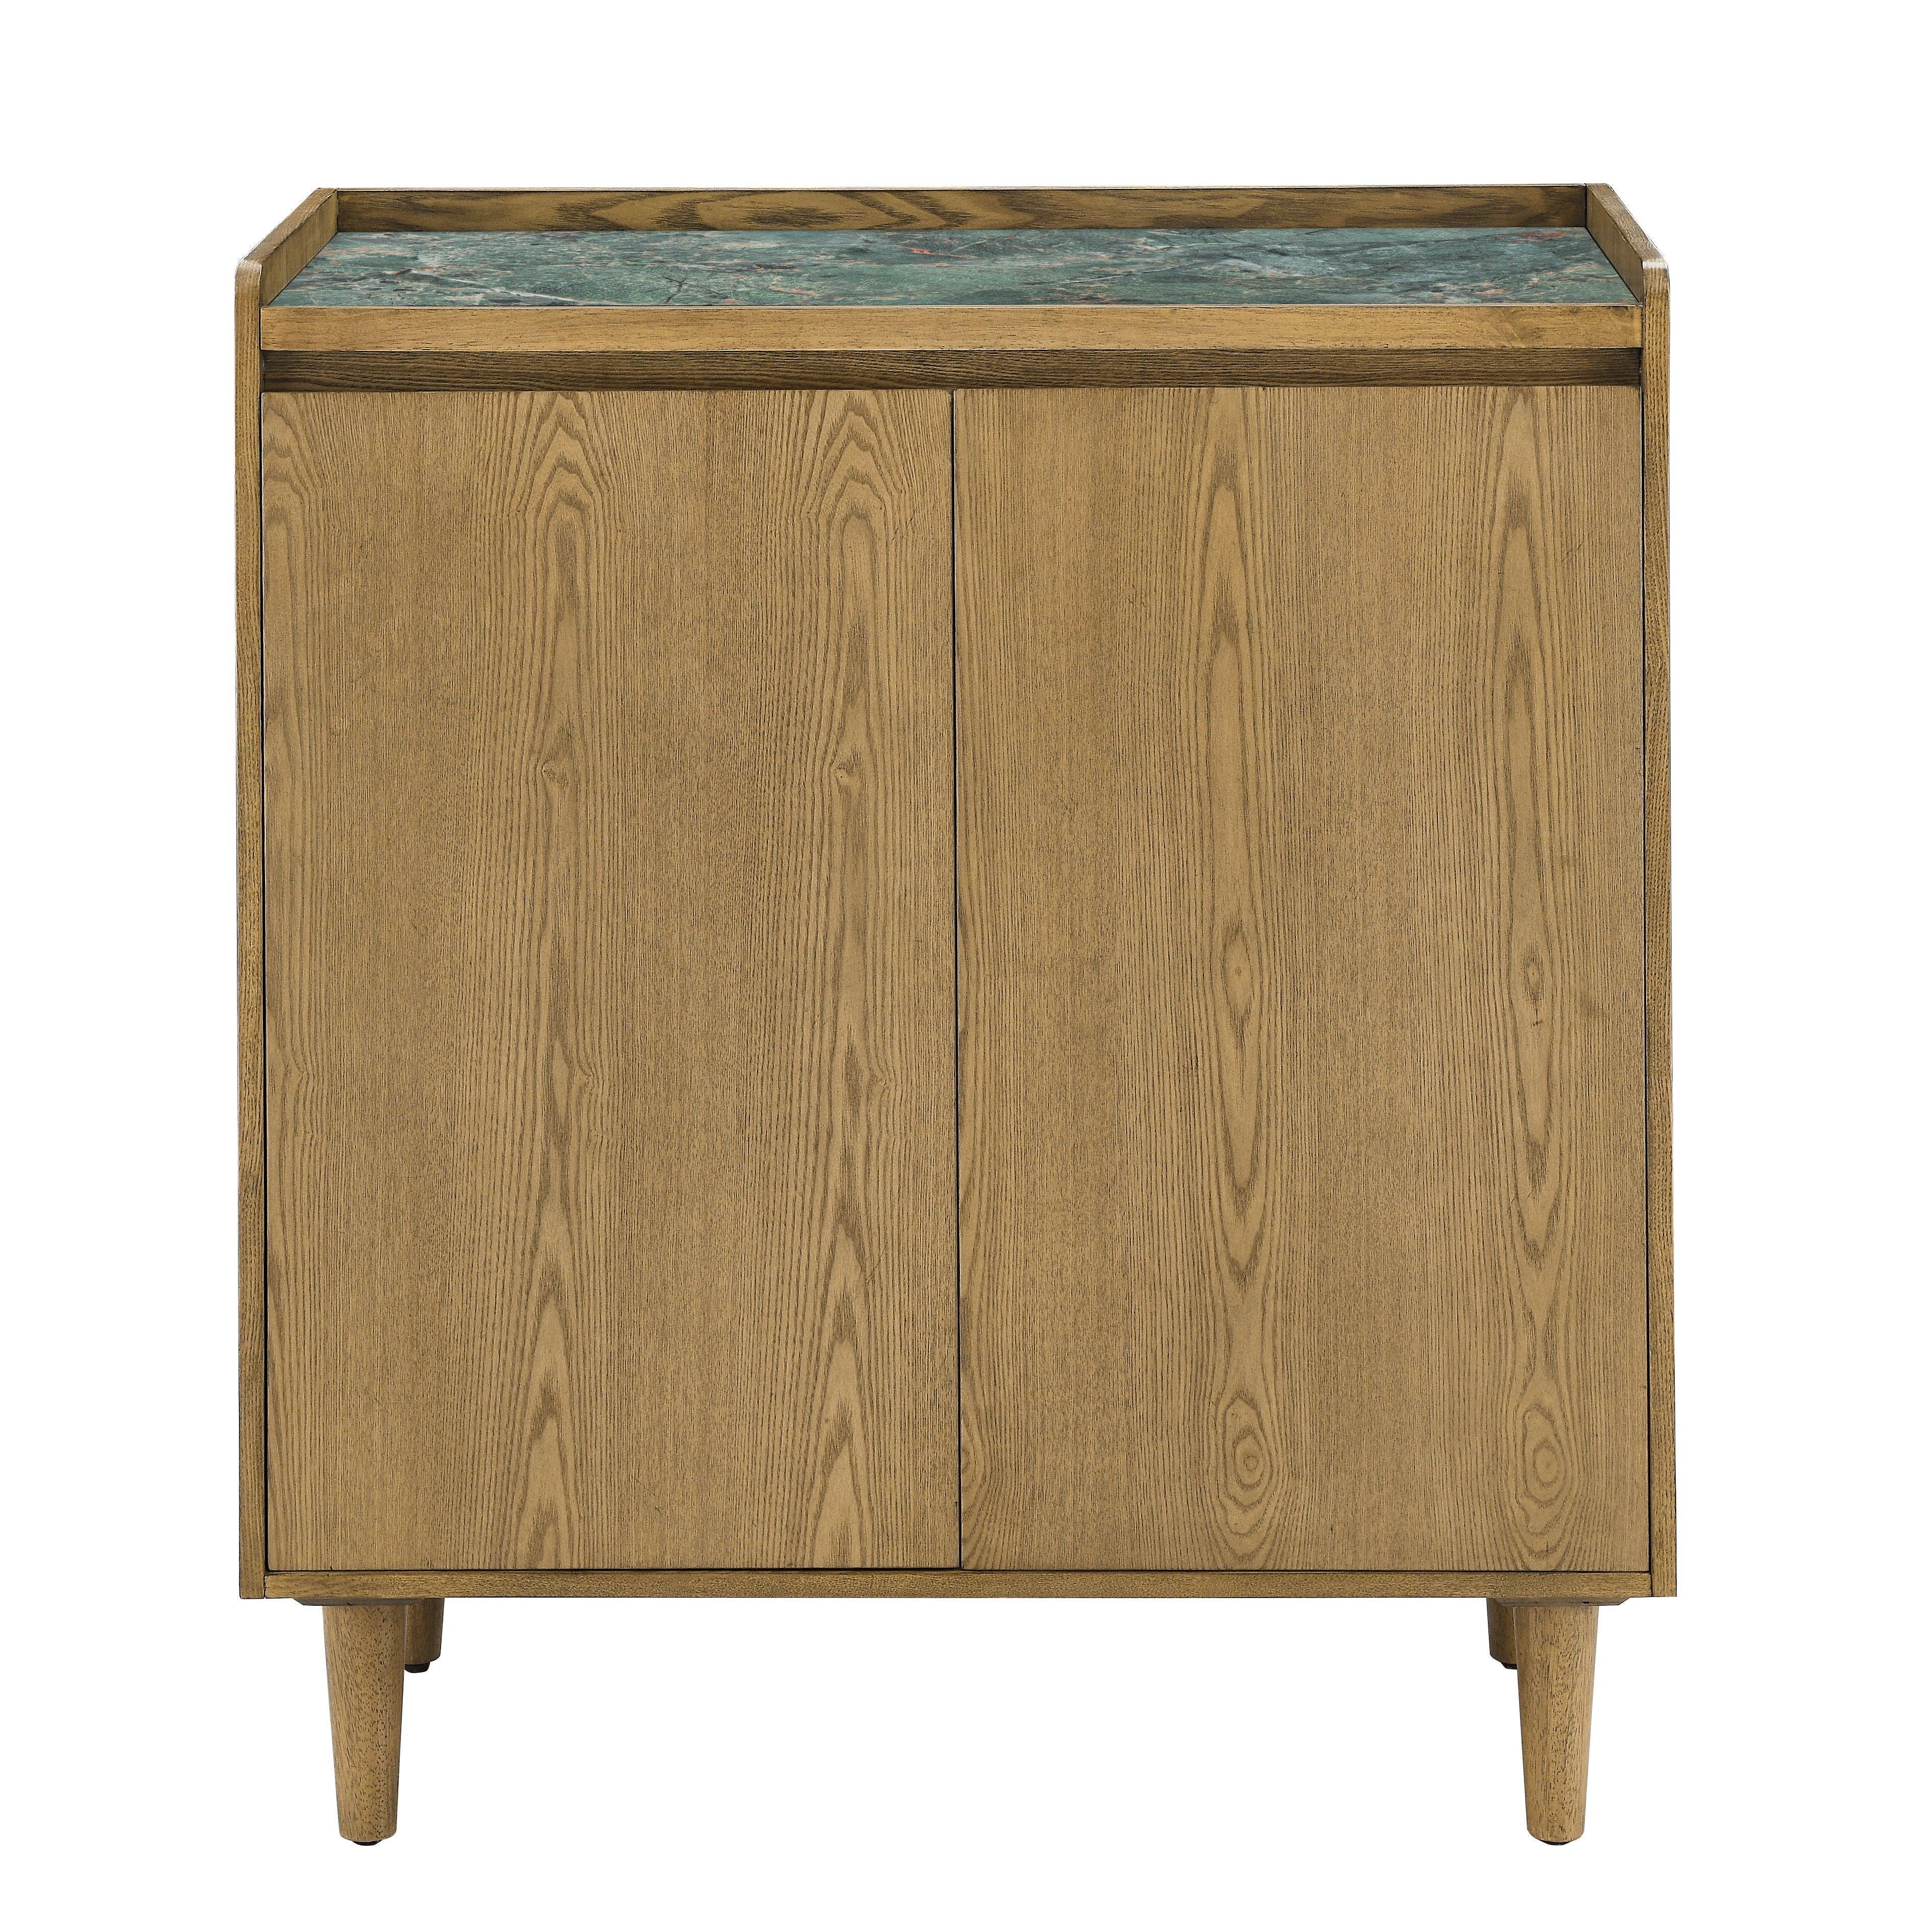 Steve Silver Furniture - Novato - Bar Cabinet With Sintered Stone Inlay Top - Light Brown - 5th Avenue Furniture